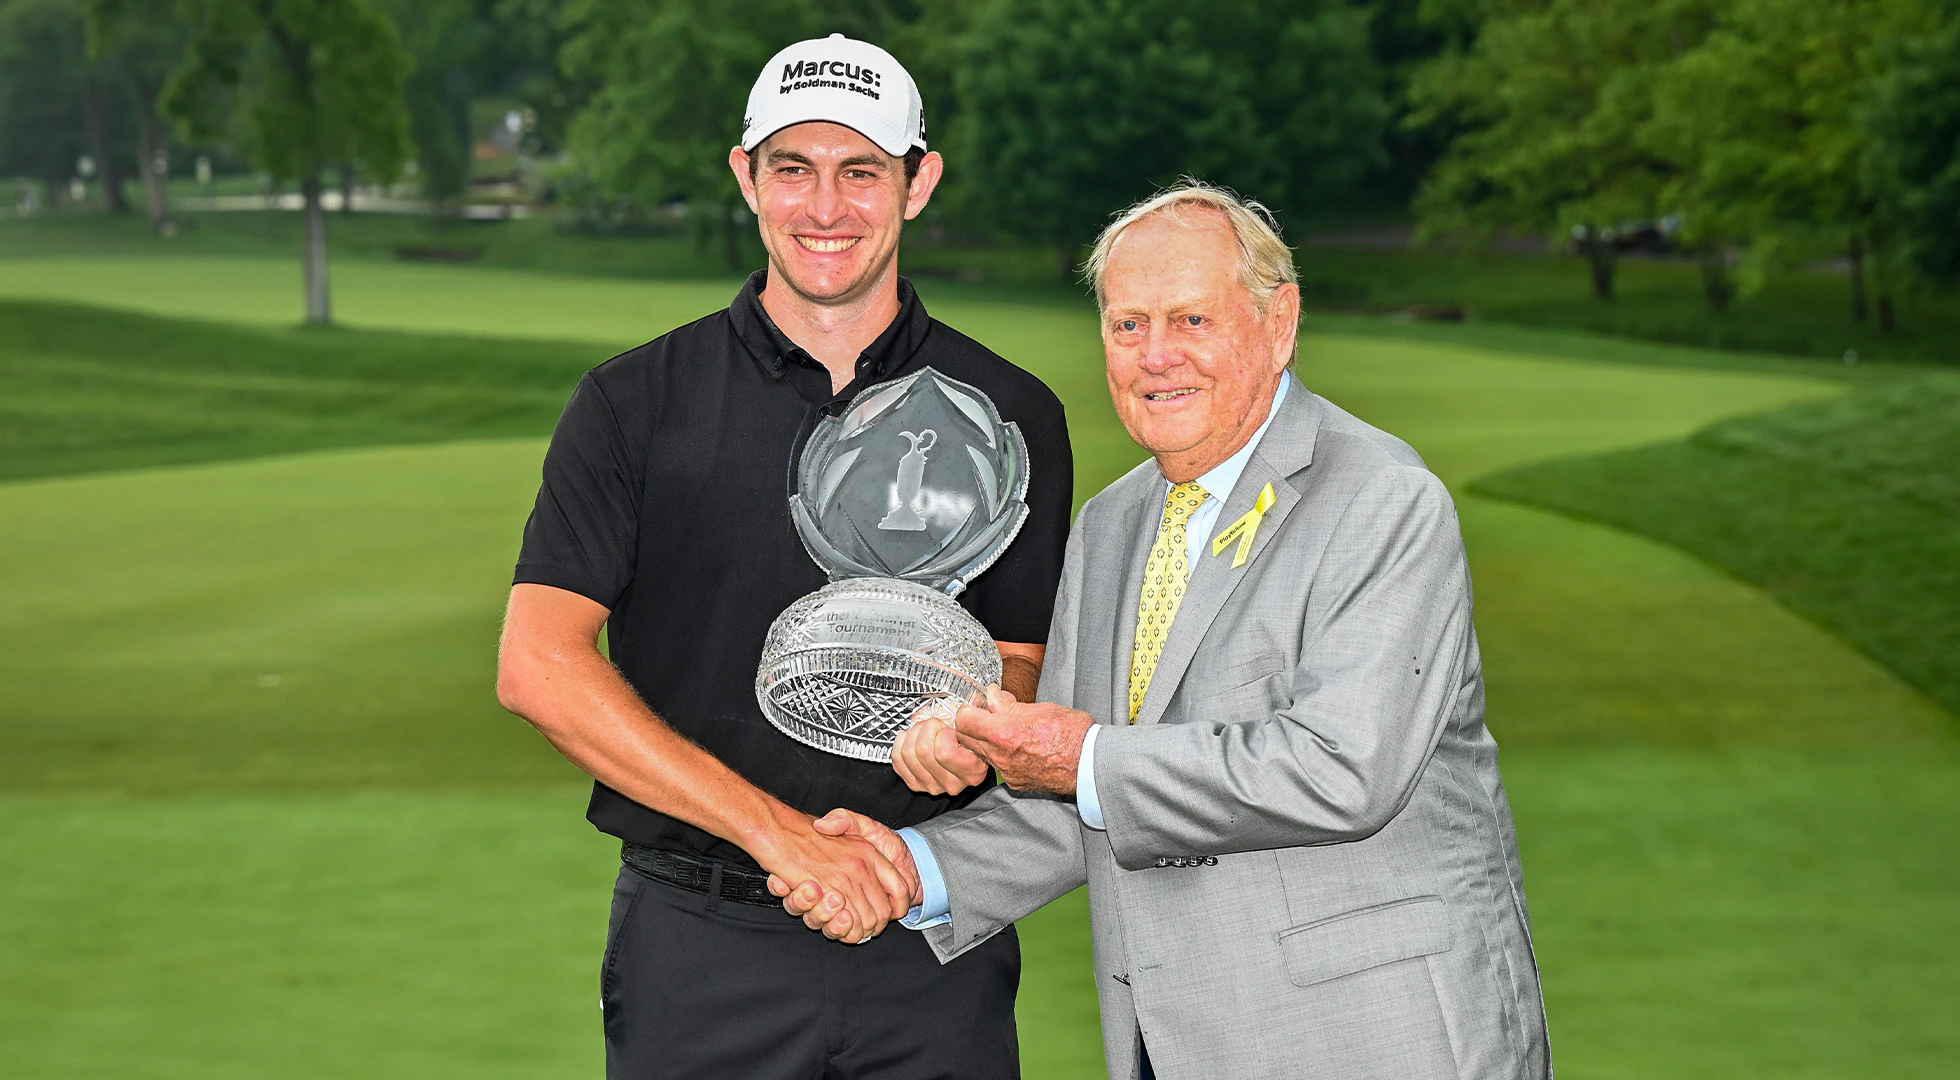 Patrick Cantlay rose seven spots in Official World Golf Ranking after playoff win at Memorial